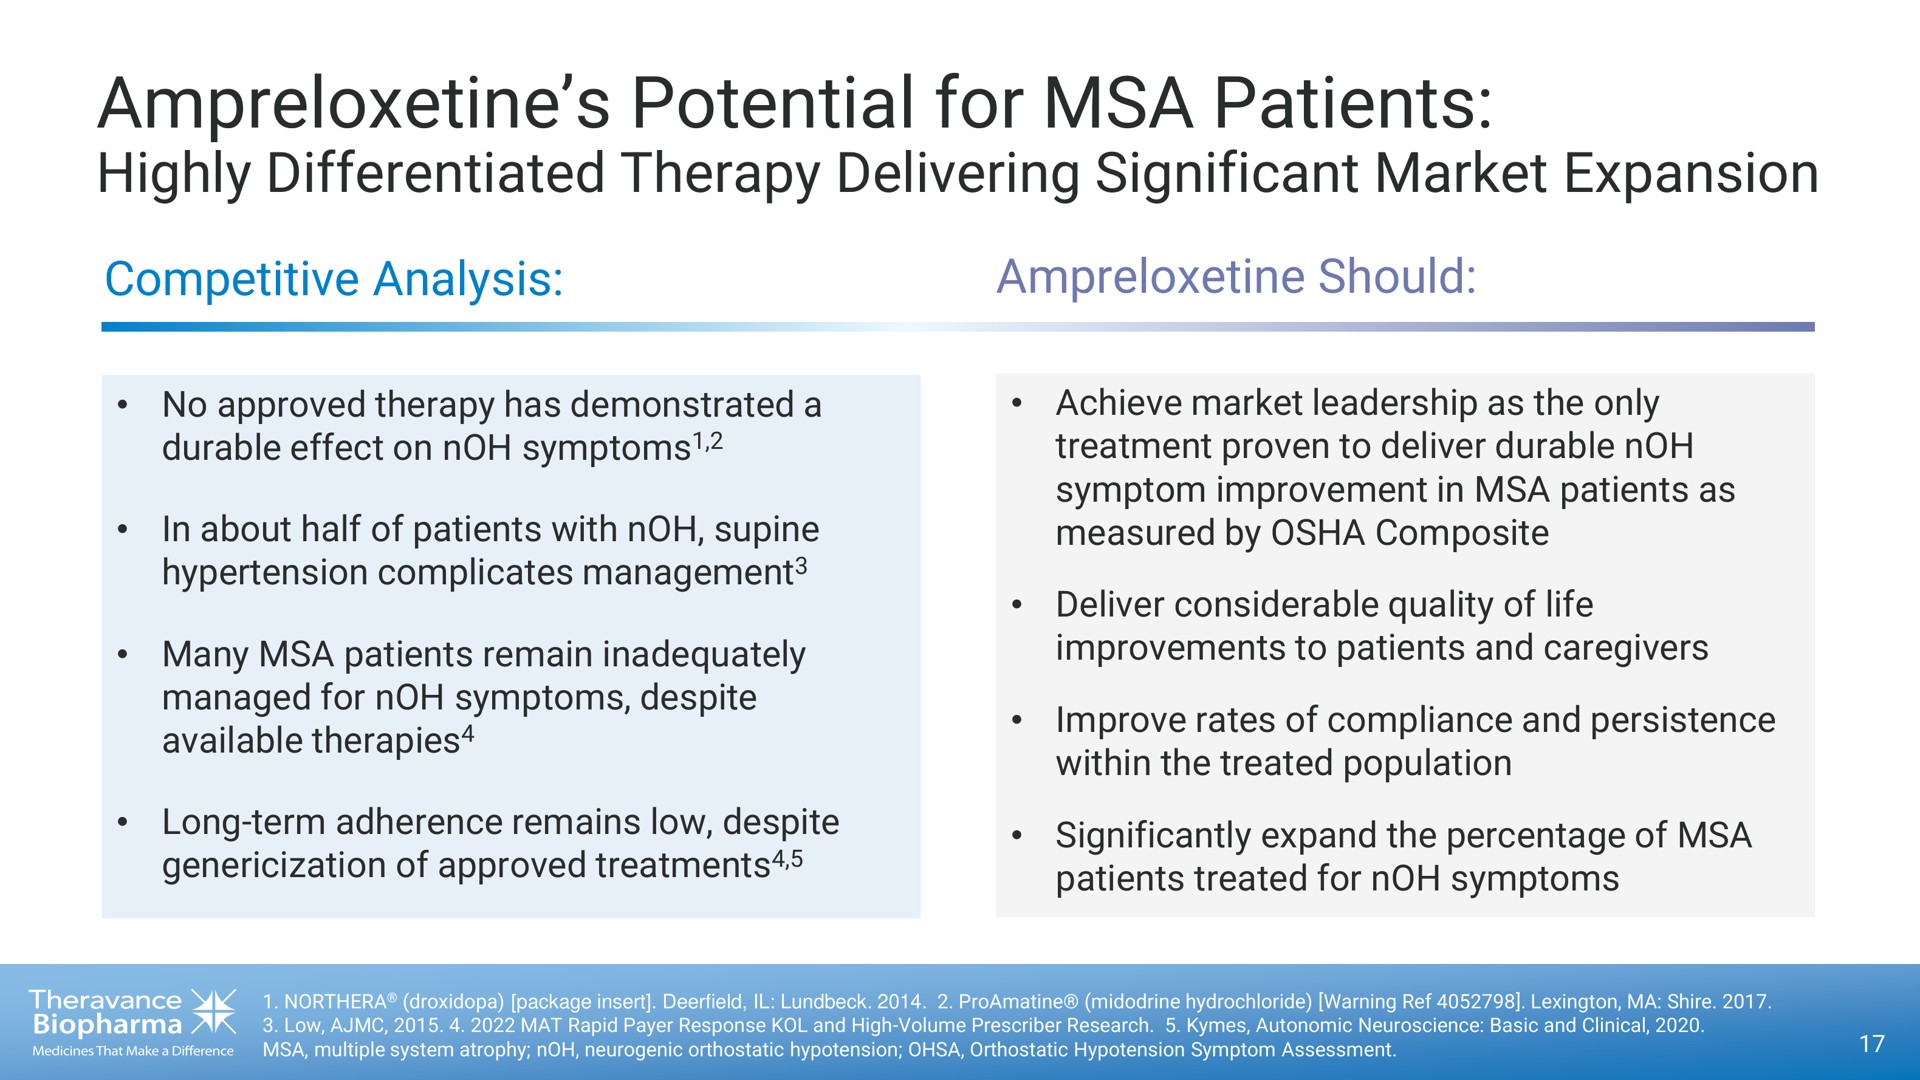 potential for patients highly differentiated therapy delivering significant market expansion | Theravance Biopharma